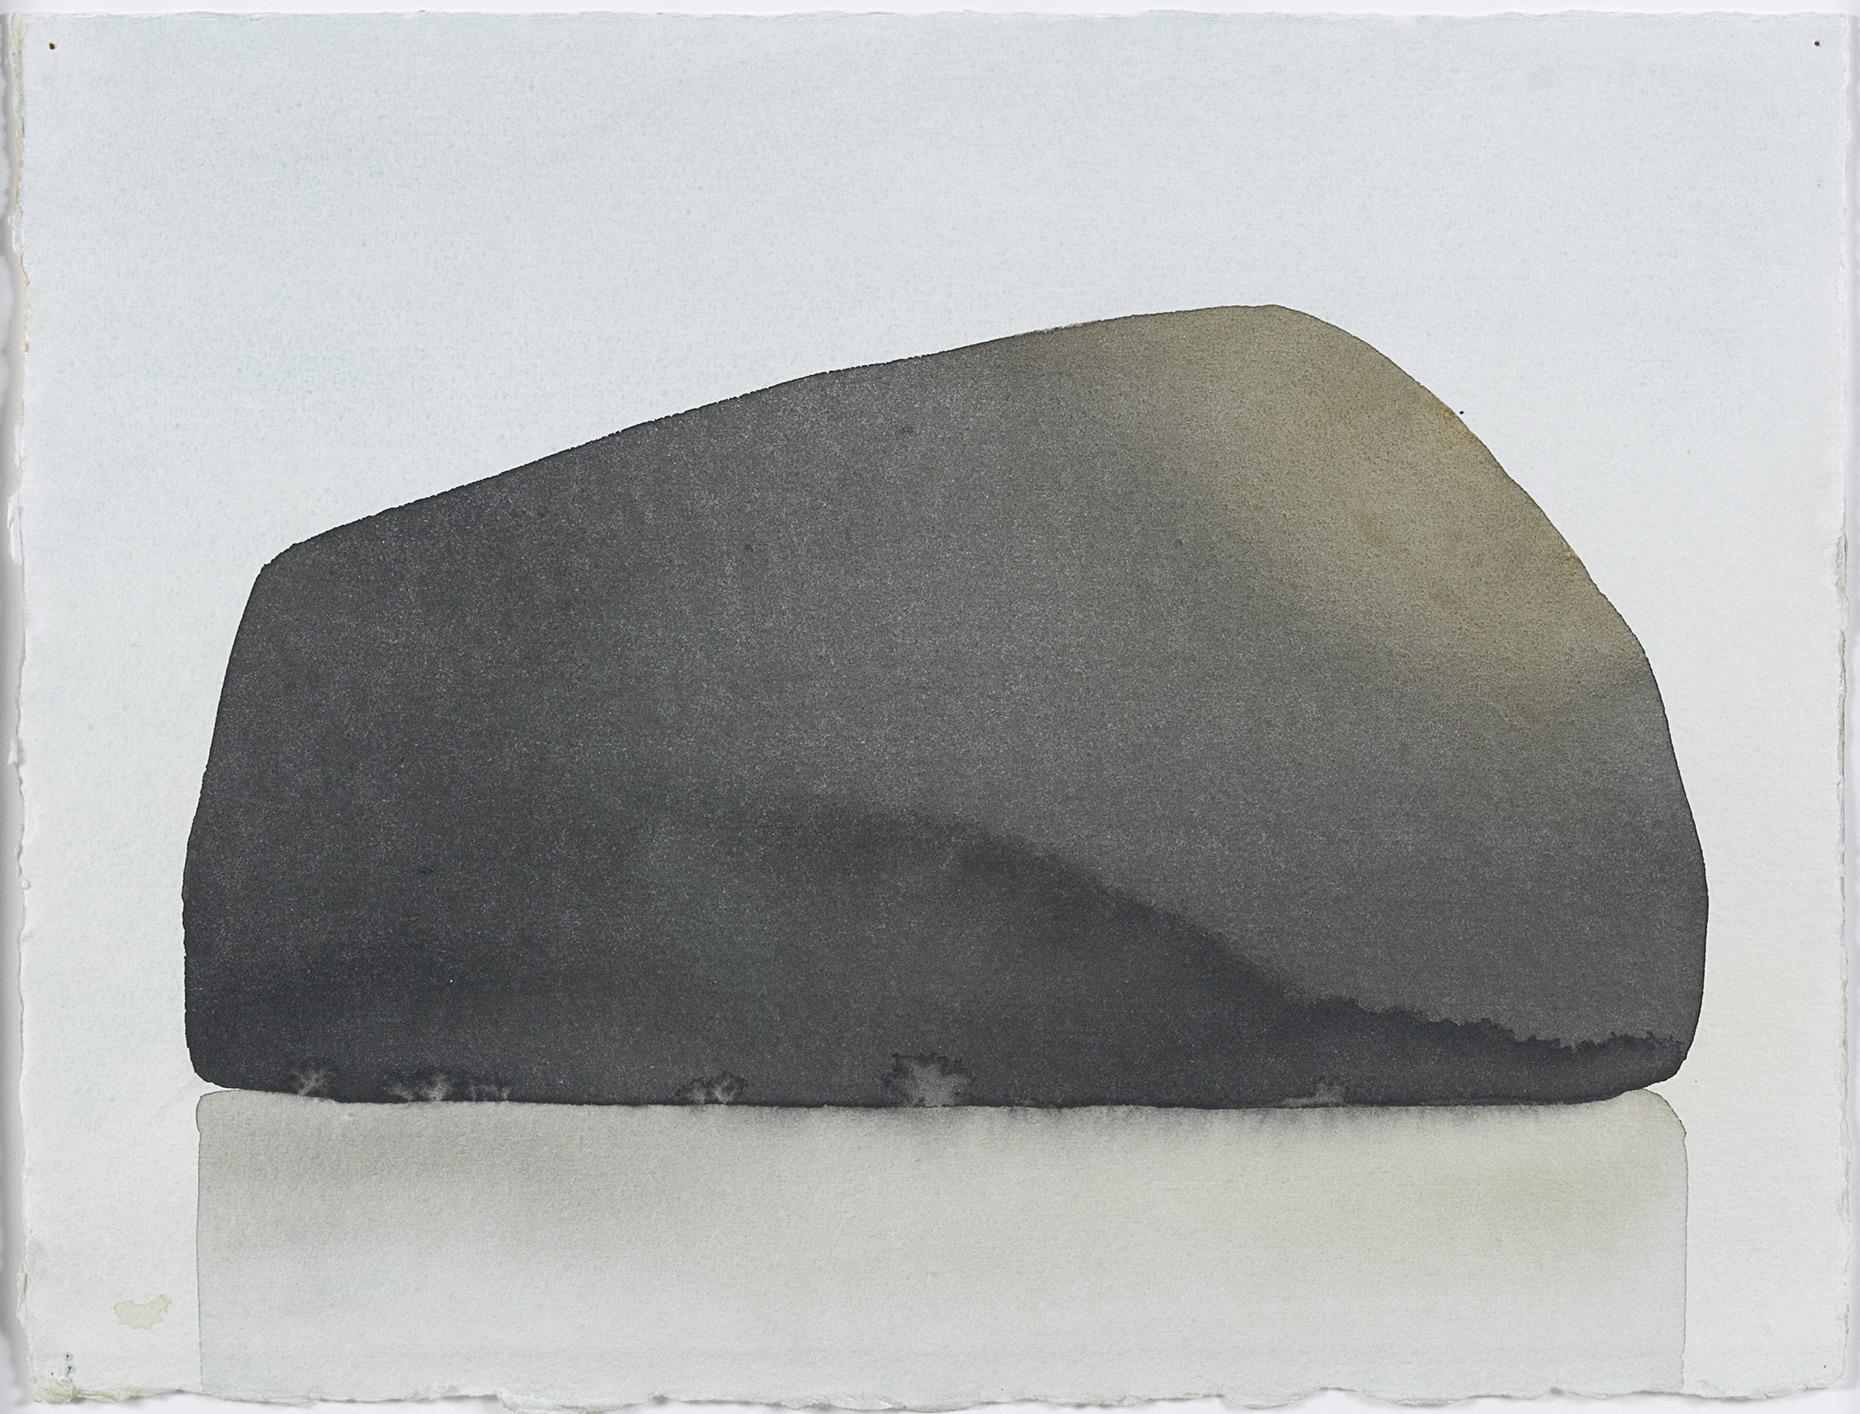 A watercolour painting of a stone by the artist Mats Gustafson.